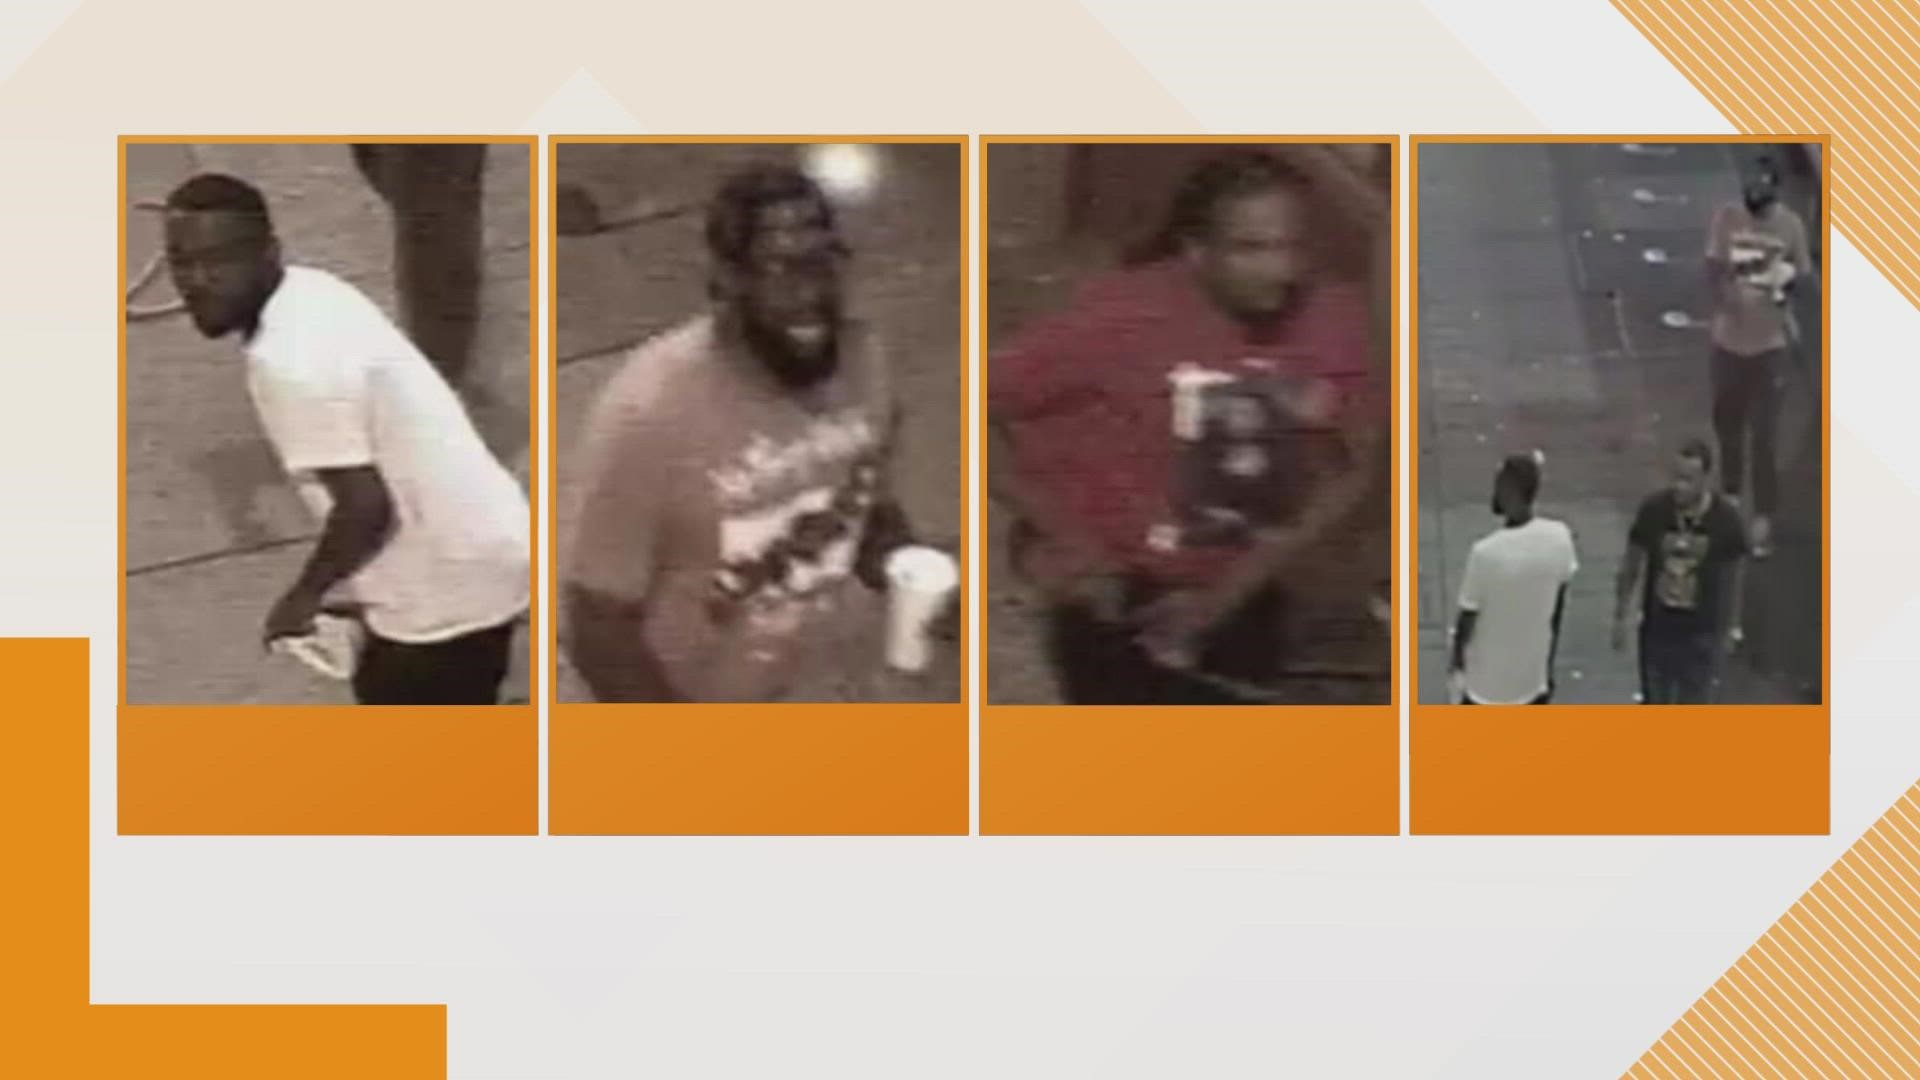 MPD said four men were caught on surveillance, and photos of the four suspects were released.